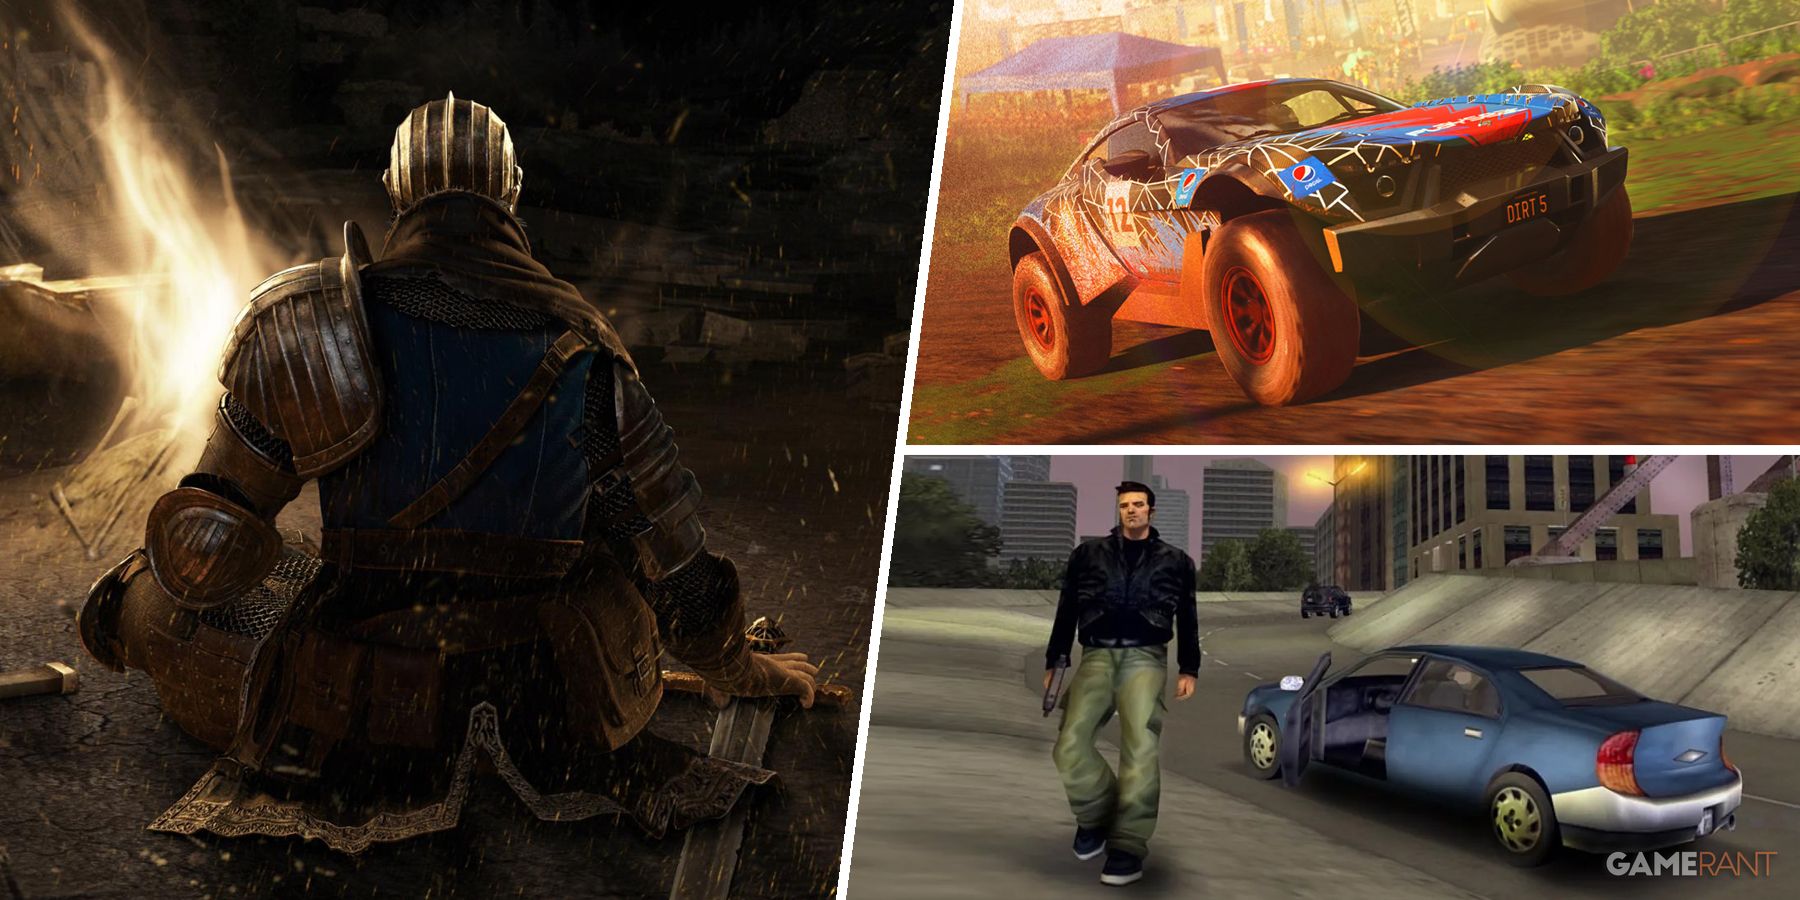 Dark Souls, Dirt 5, and Grand Theft Auto 3